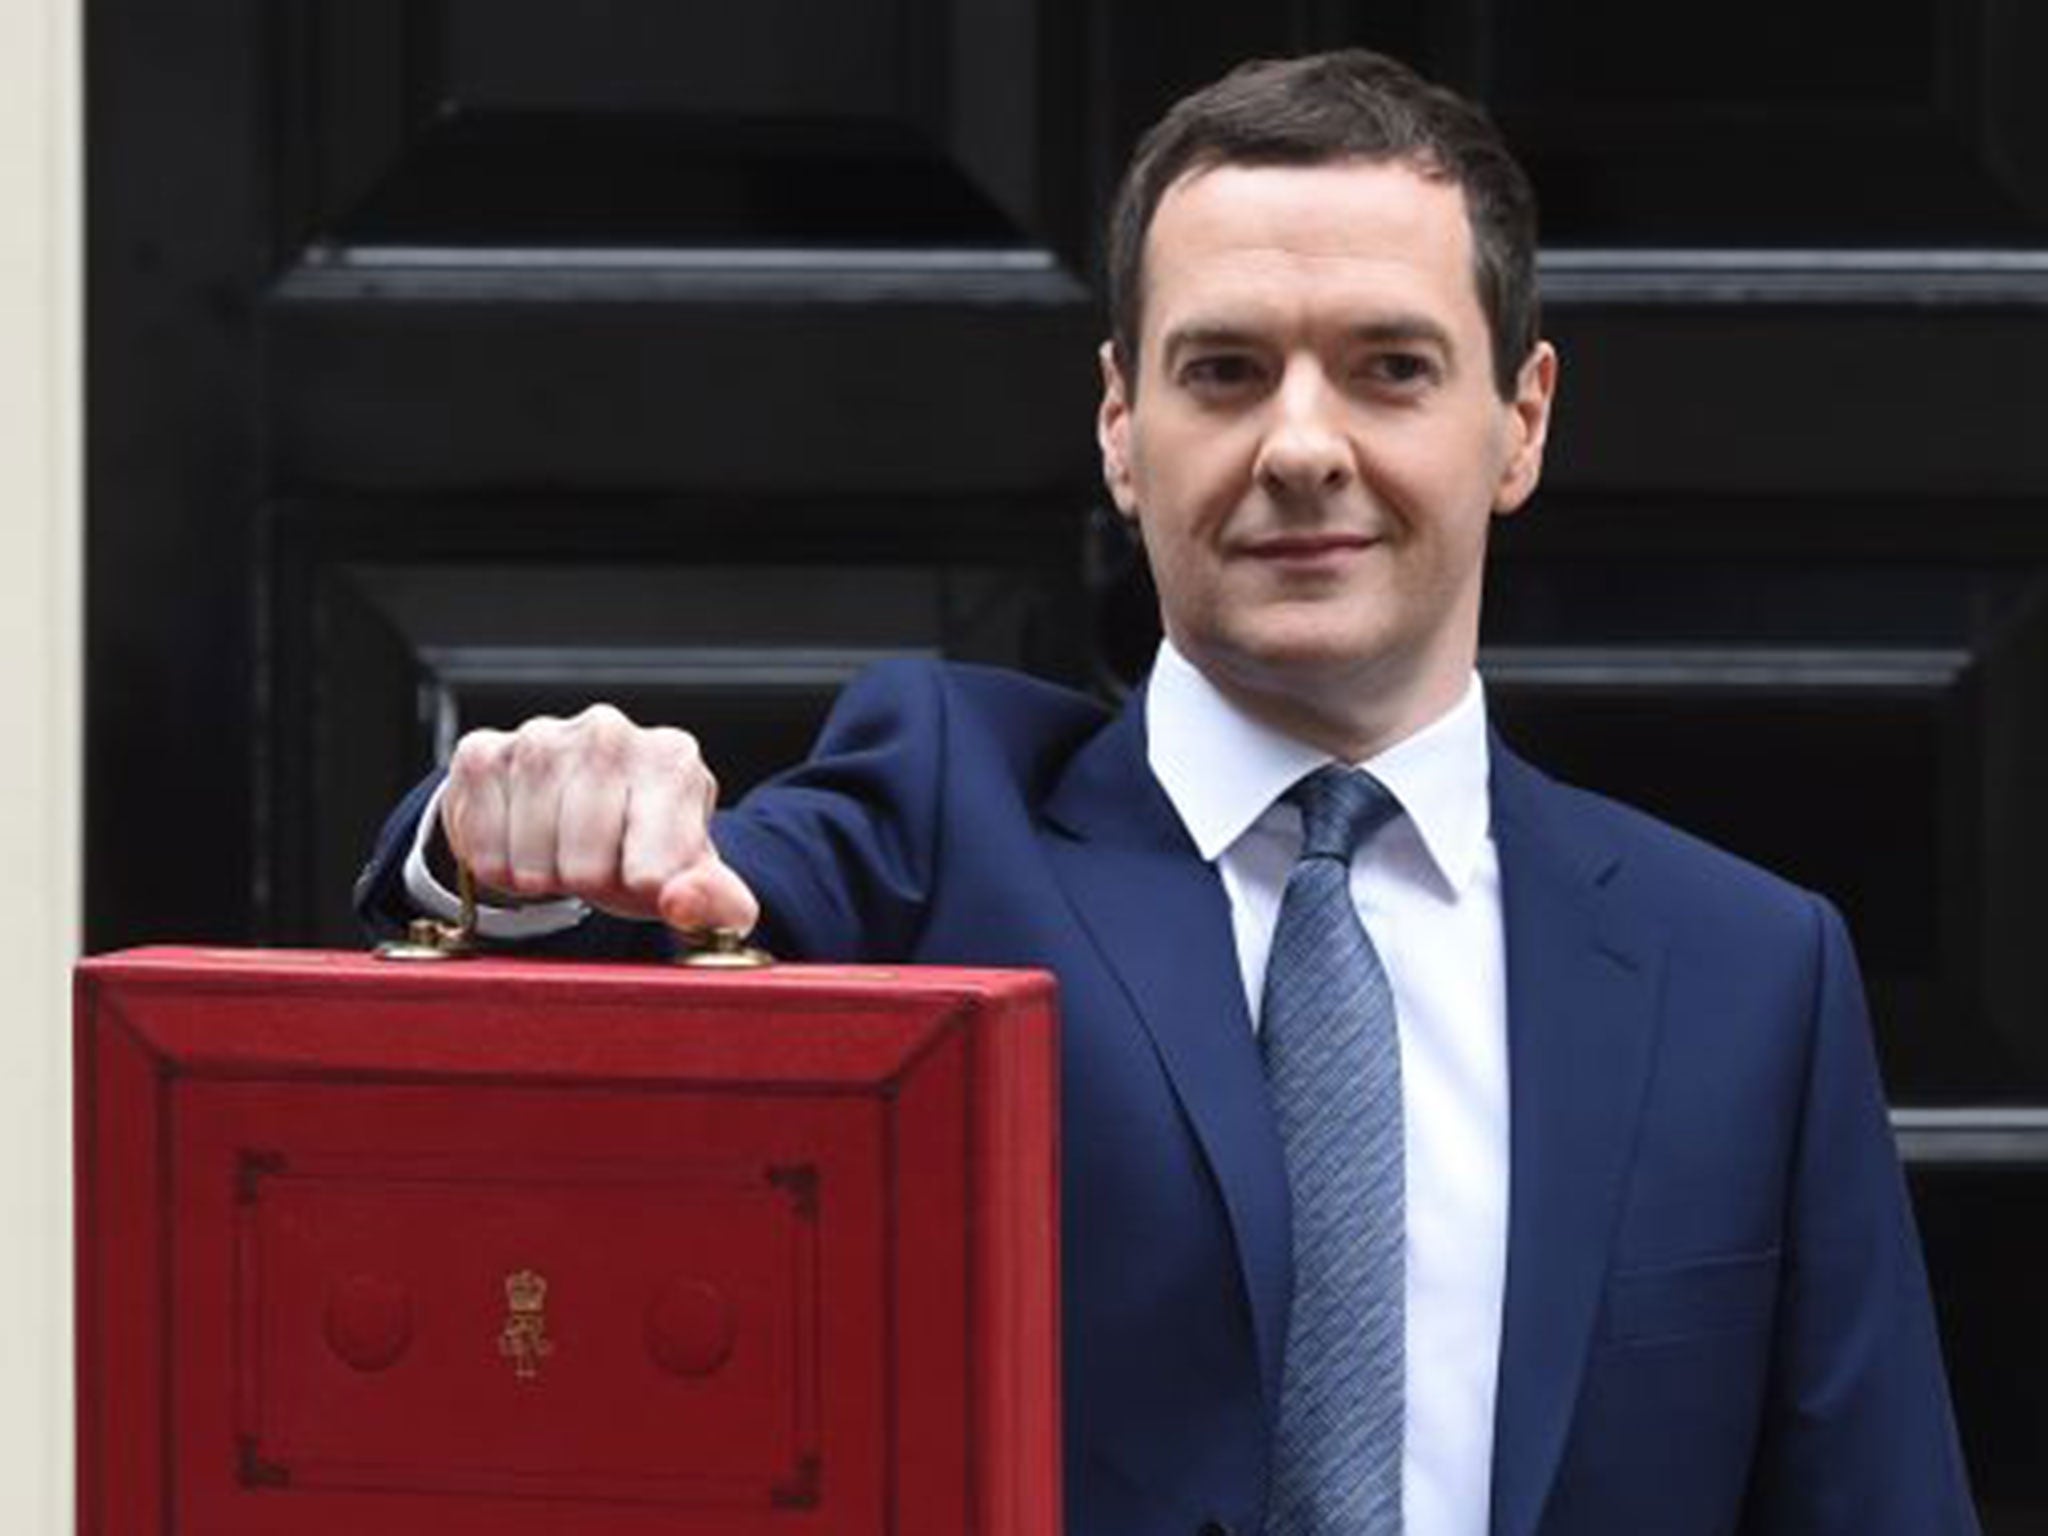 Labour said the admission showed that George Osborne had abandoned 'evidence-based policy' in the Budget